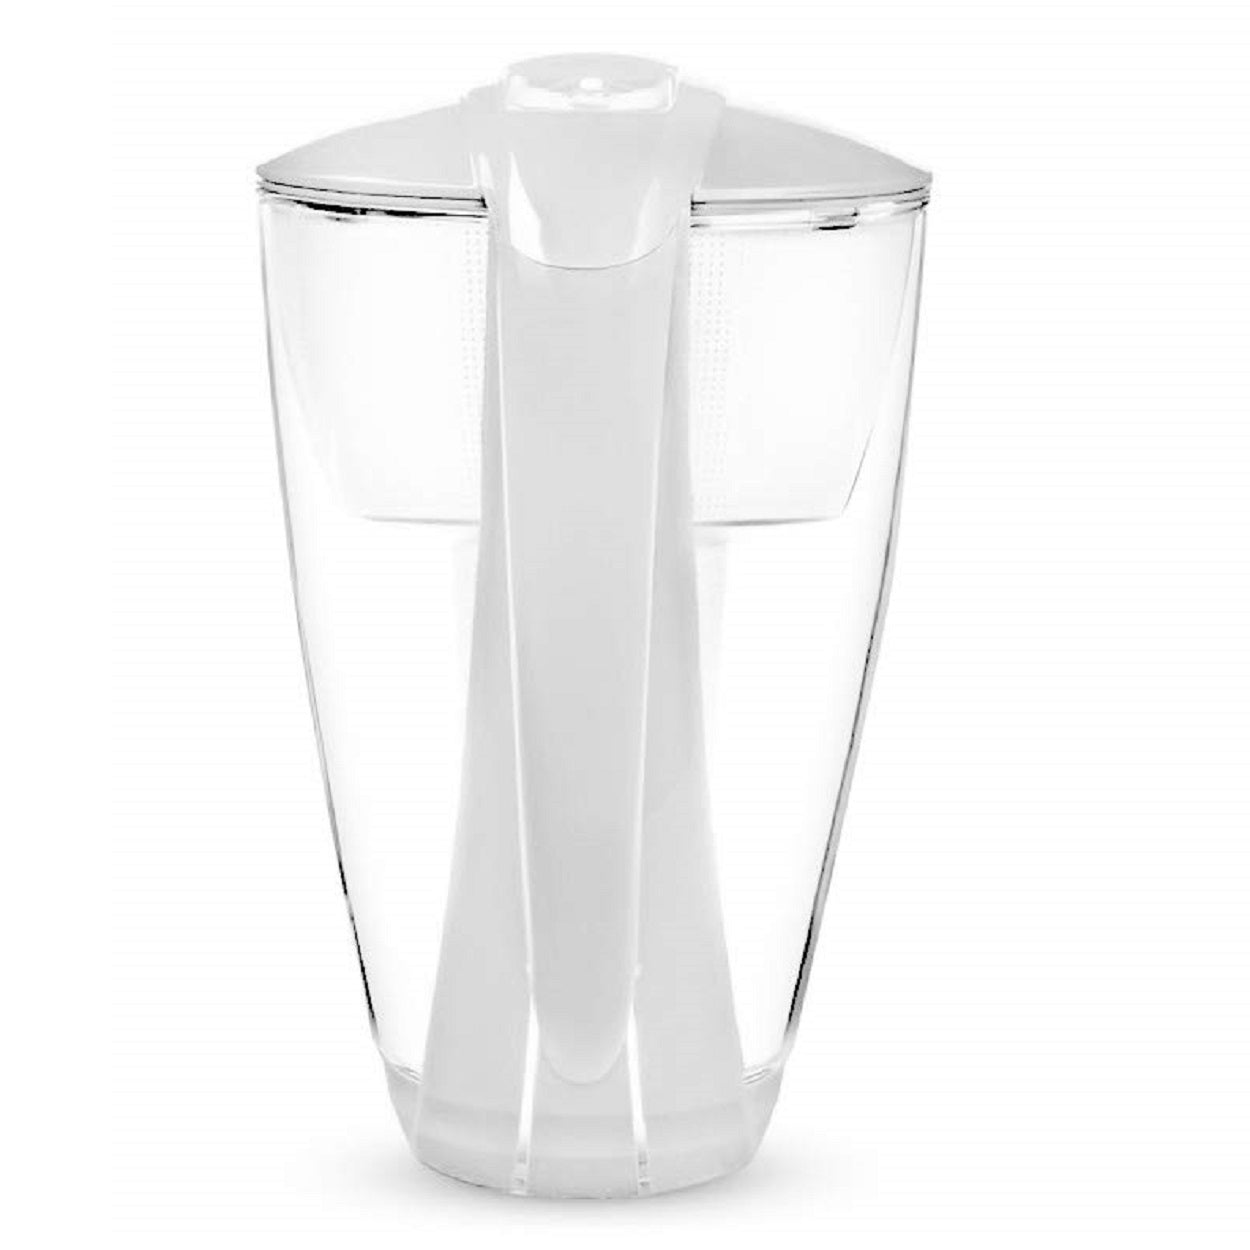 PearlCo Water Filter Jug Glass LED CLASSIC 2 Litre - White